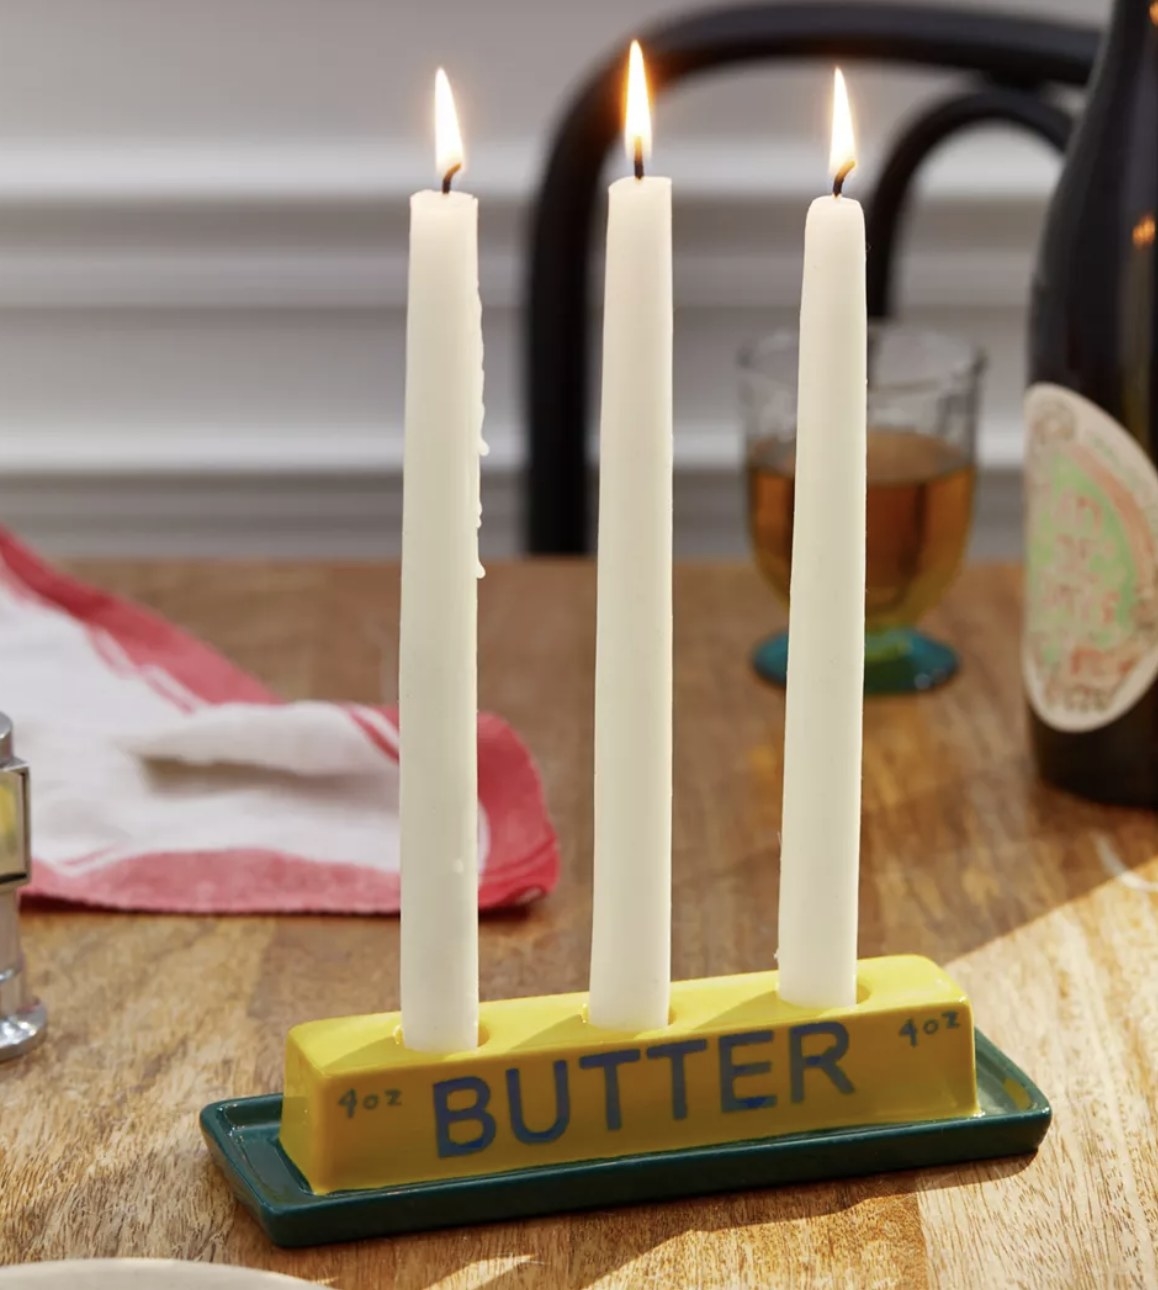 A candle stick holder shaped like a stick of butter holding three candles